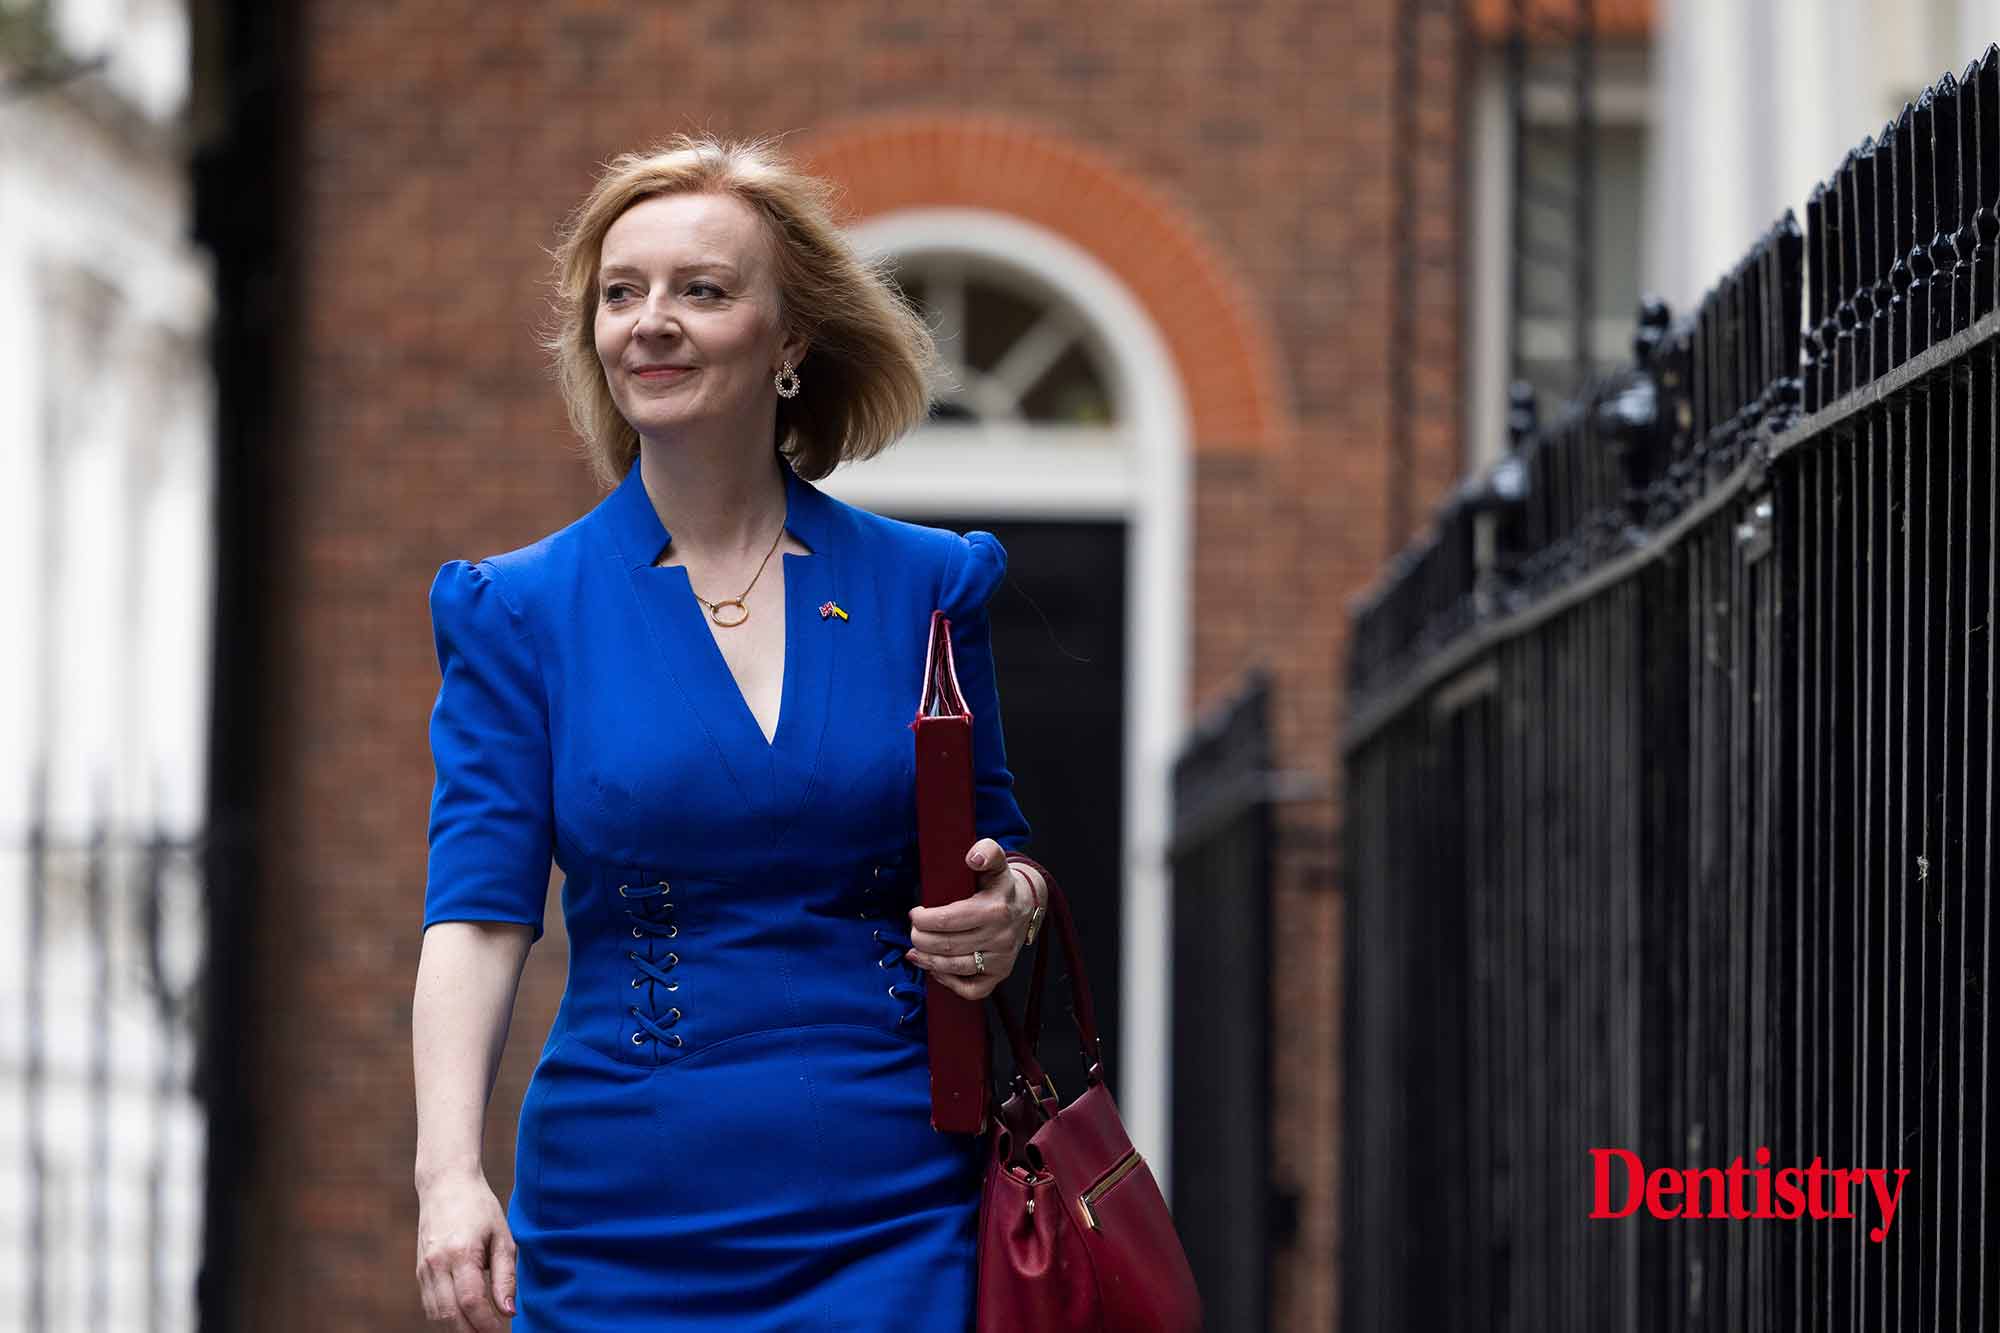 Everything dentistry needs to know about Liz Truss